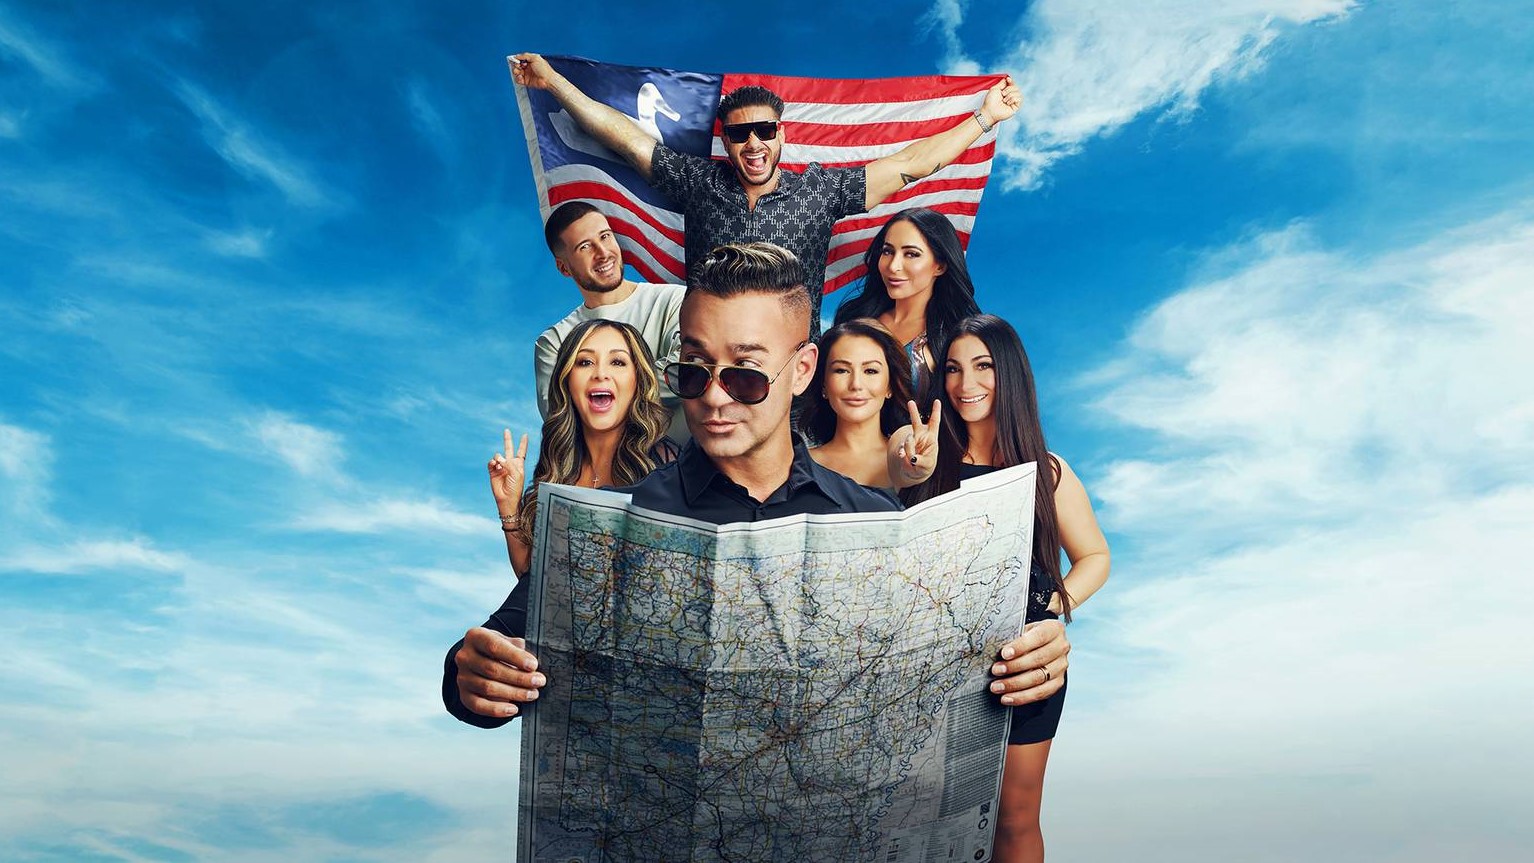 ambitie Haven Vochtigheid How to Watch Jersey Shore Family Vacation Season 6 Online from Anywhere -  TechNadu